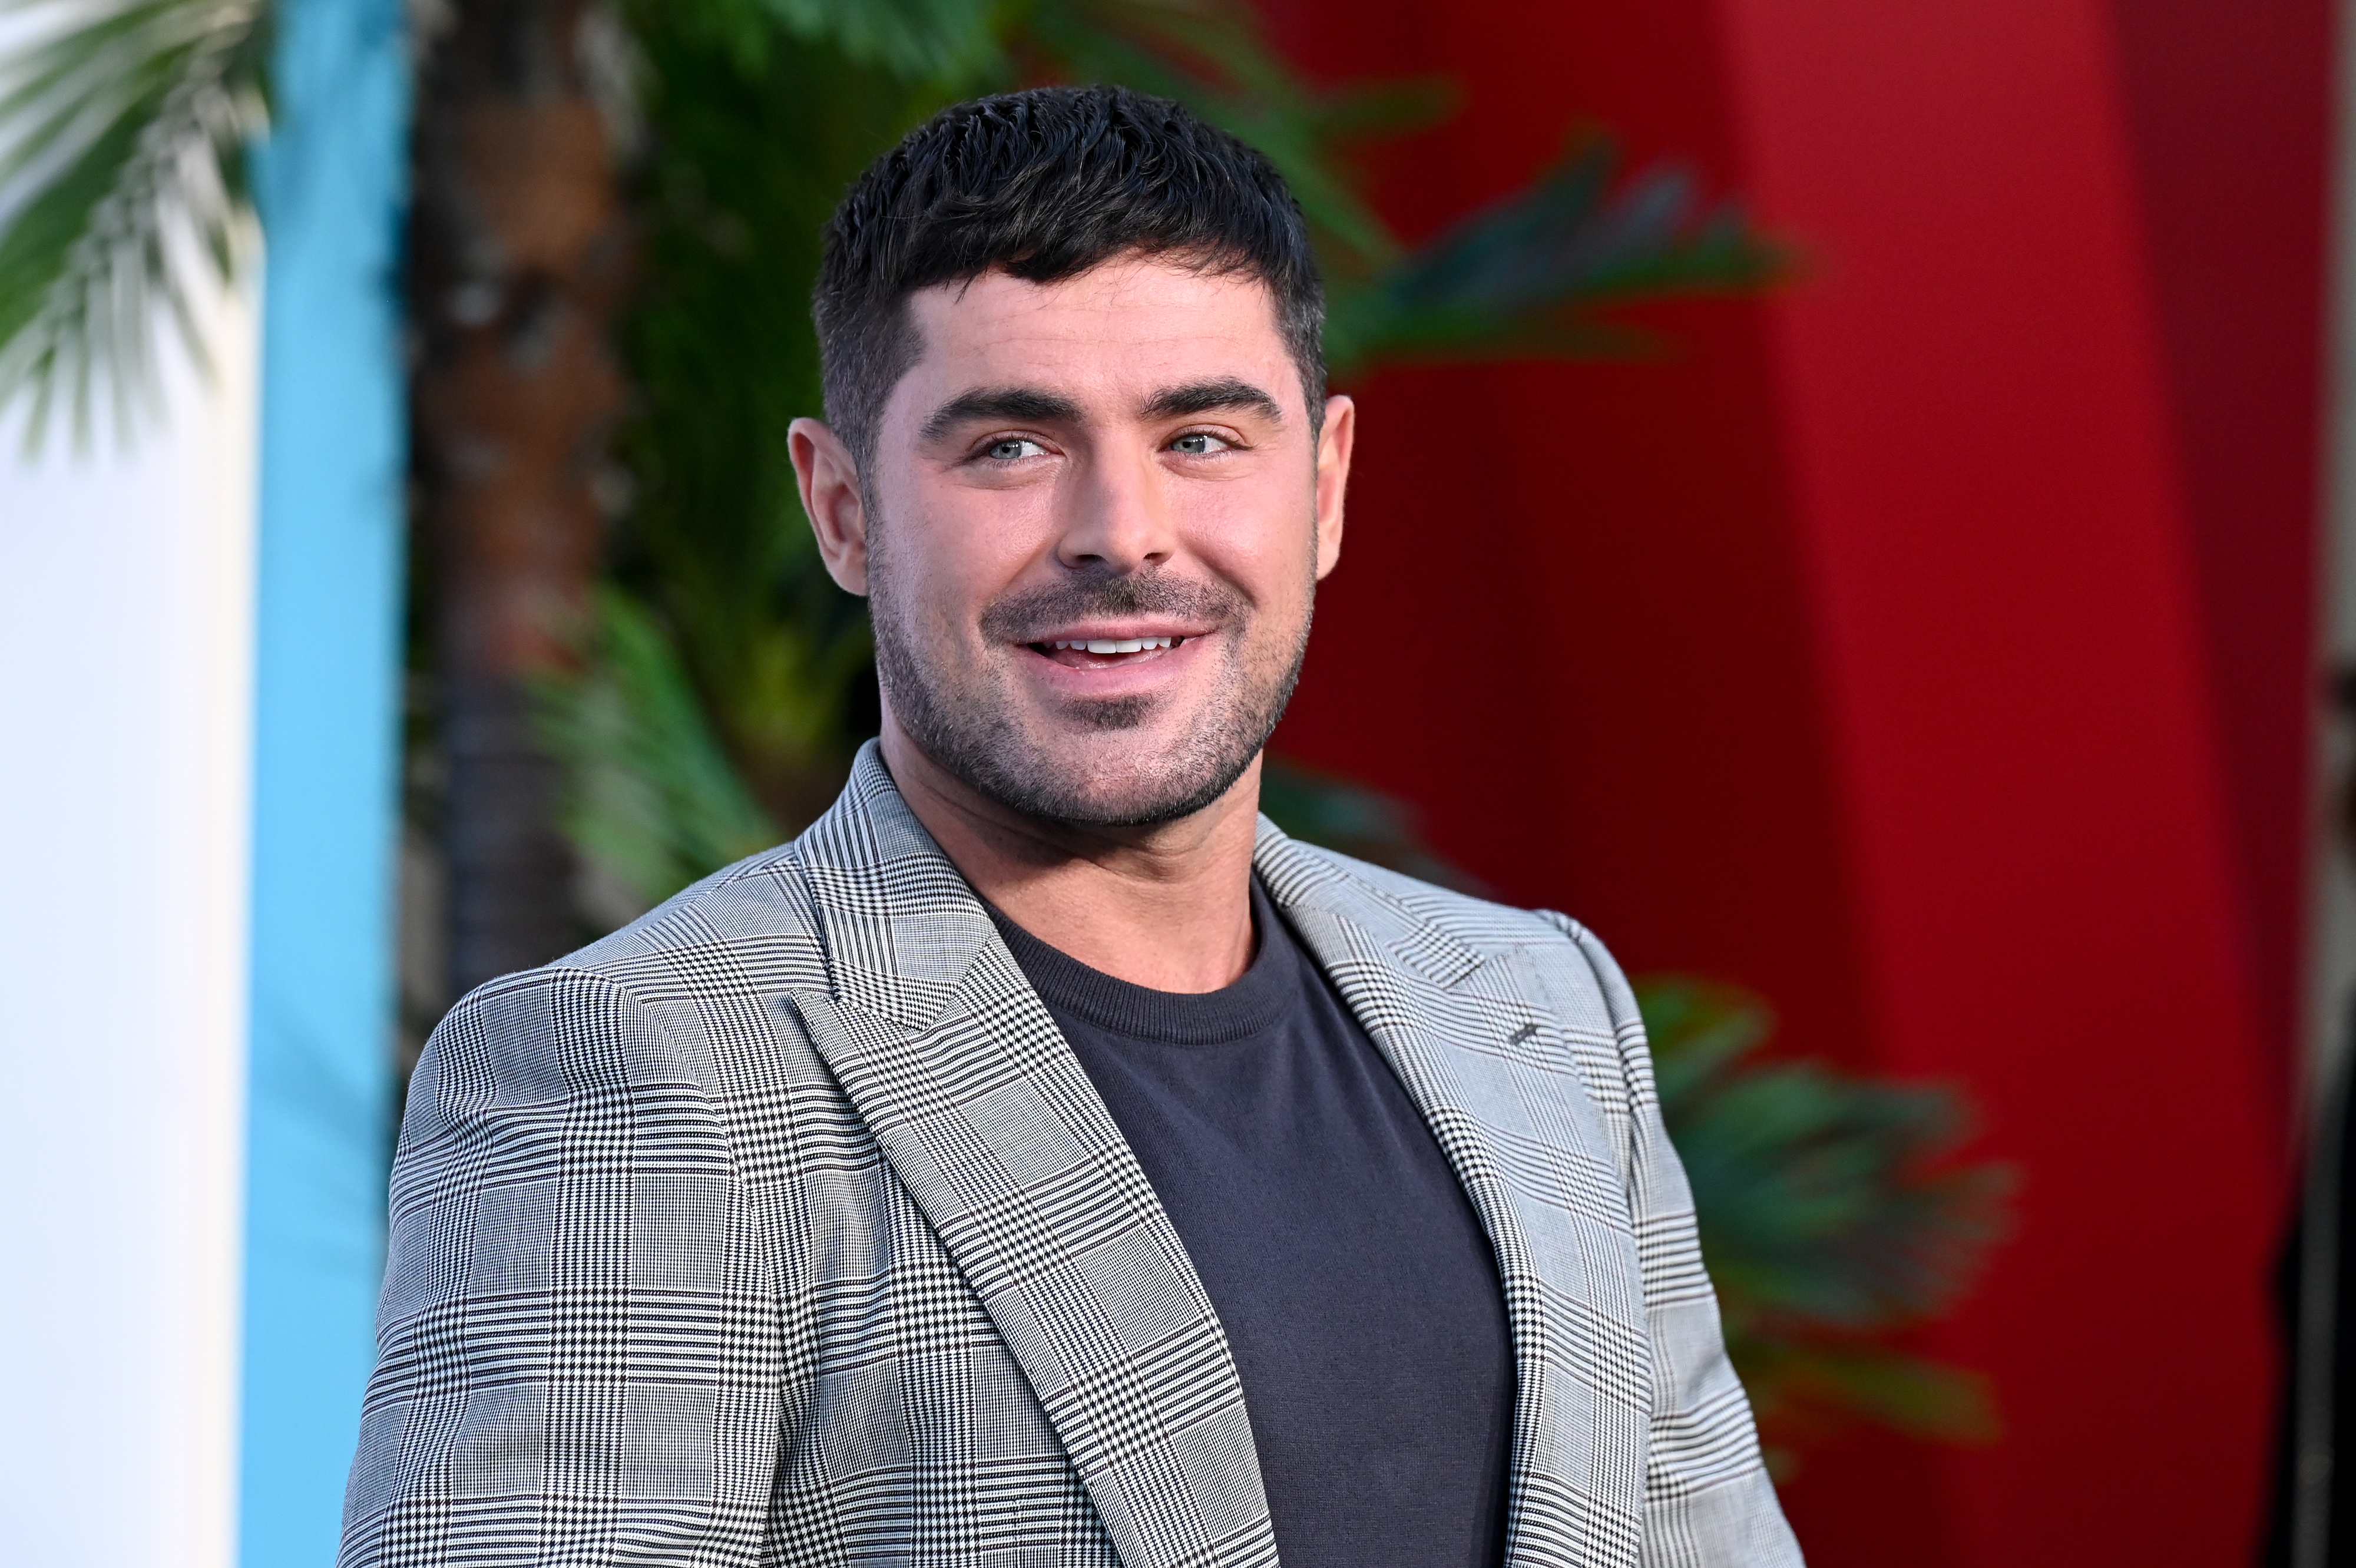 Zac Efron is smiling at an event, wearing a stylish plaid blazer over a black shirt, with palm leaves and a red backdrop behind him